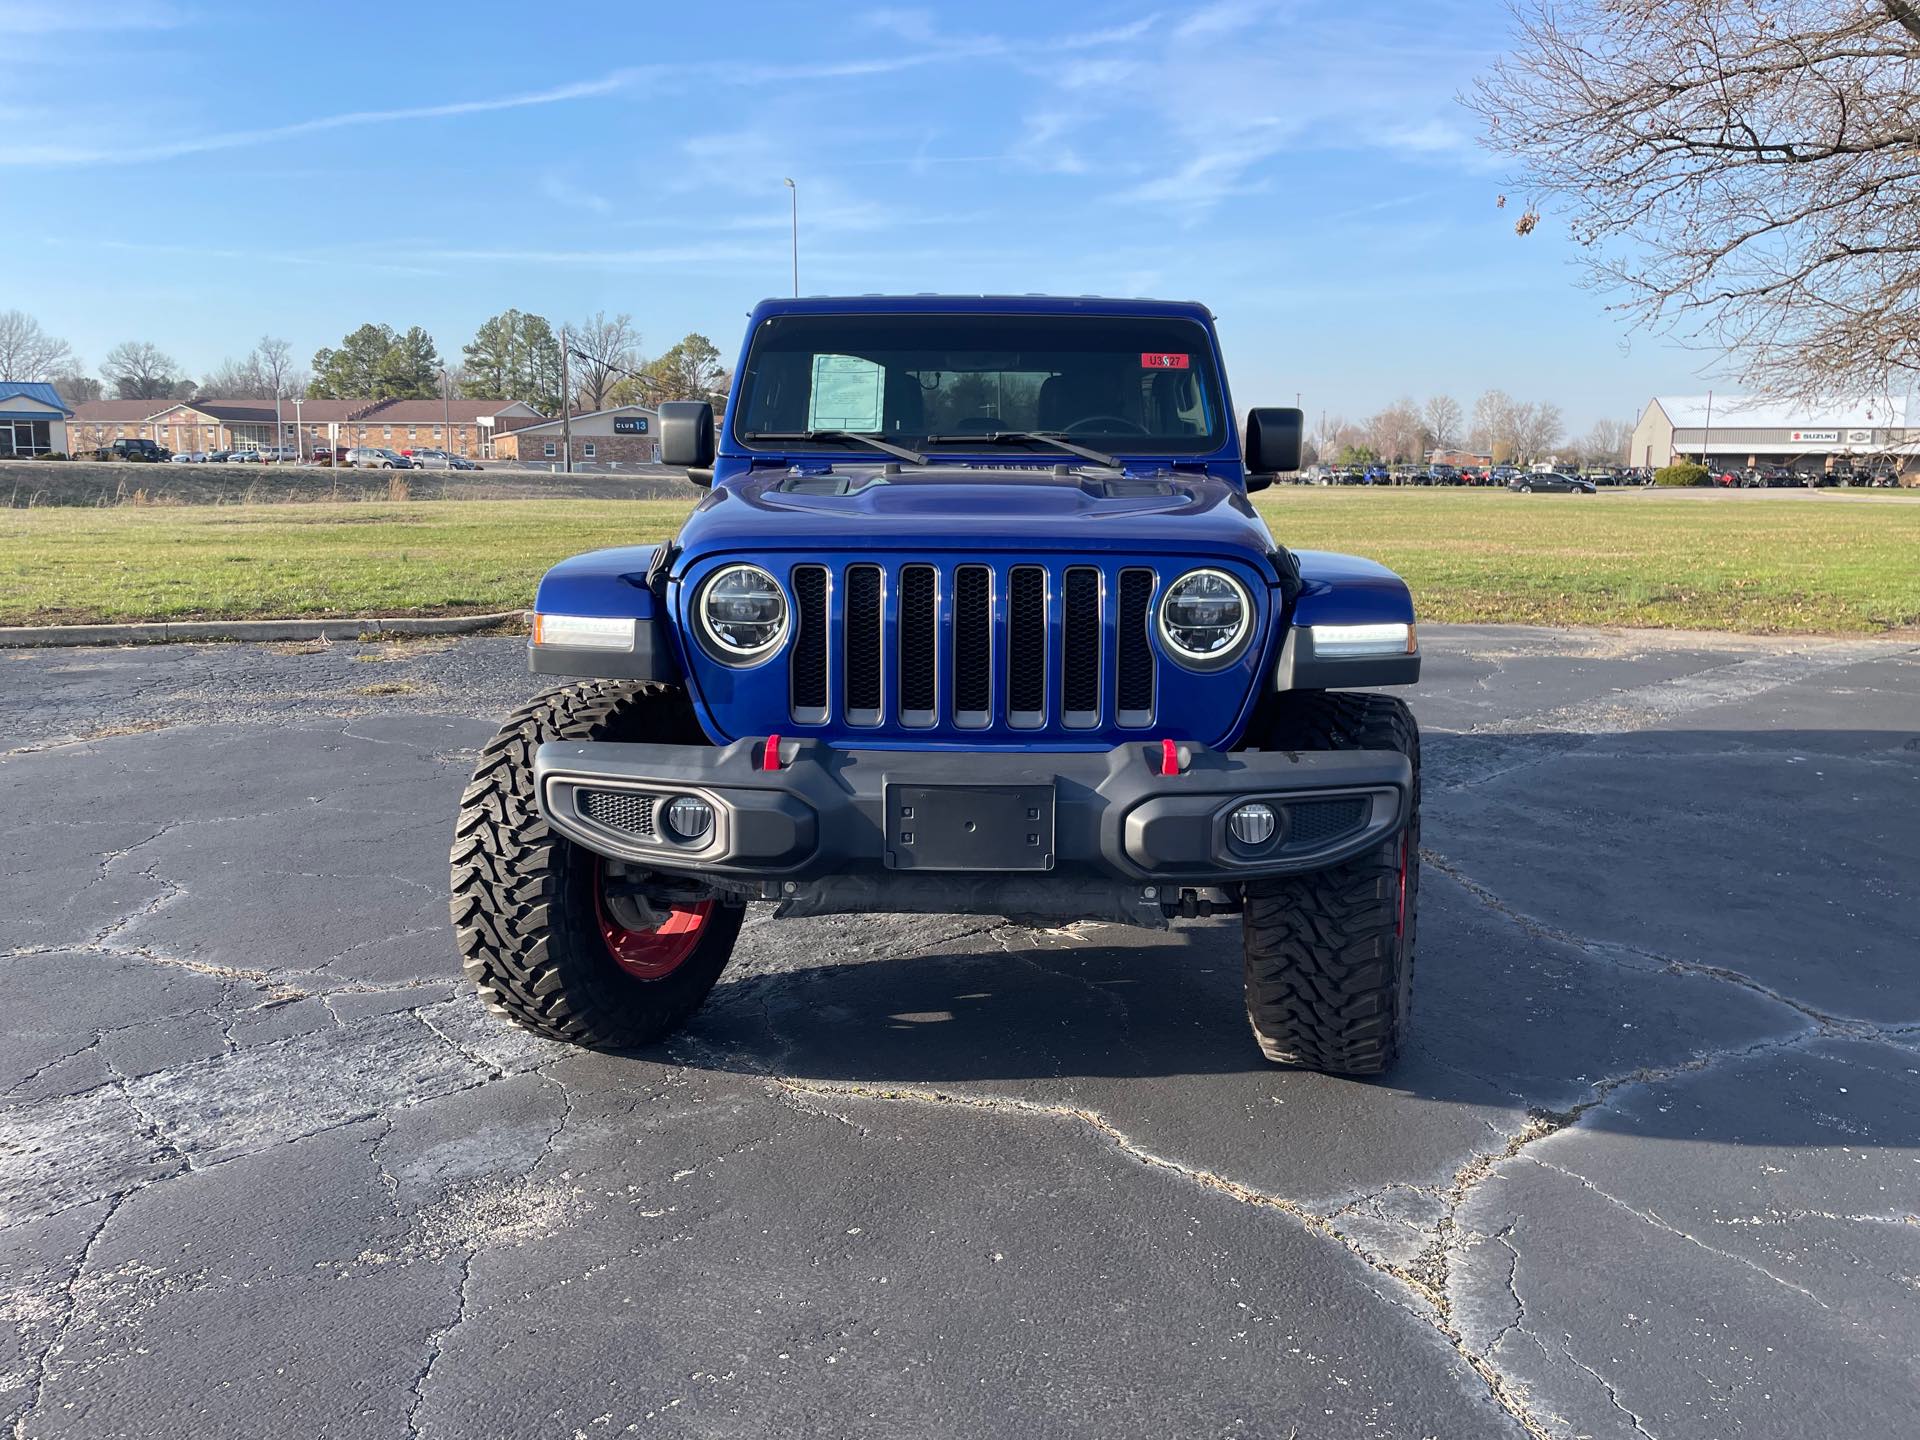 2019 Jeep Wrangler Unlimited at Southern Illinois Motorsports